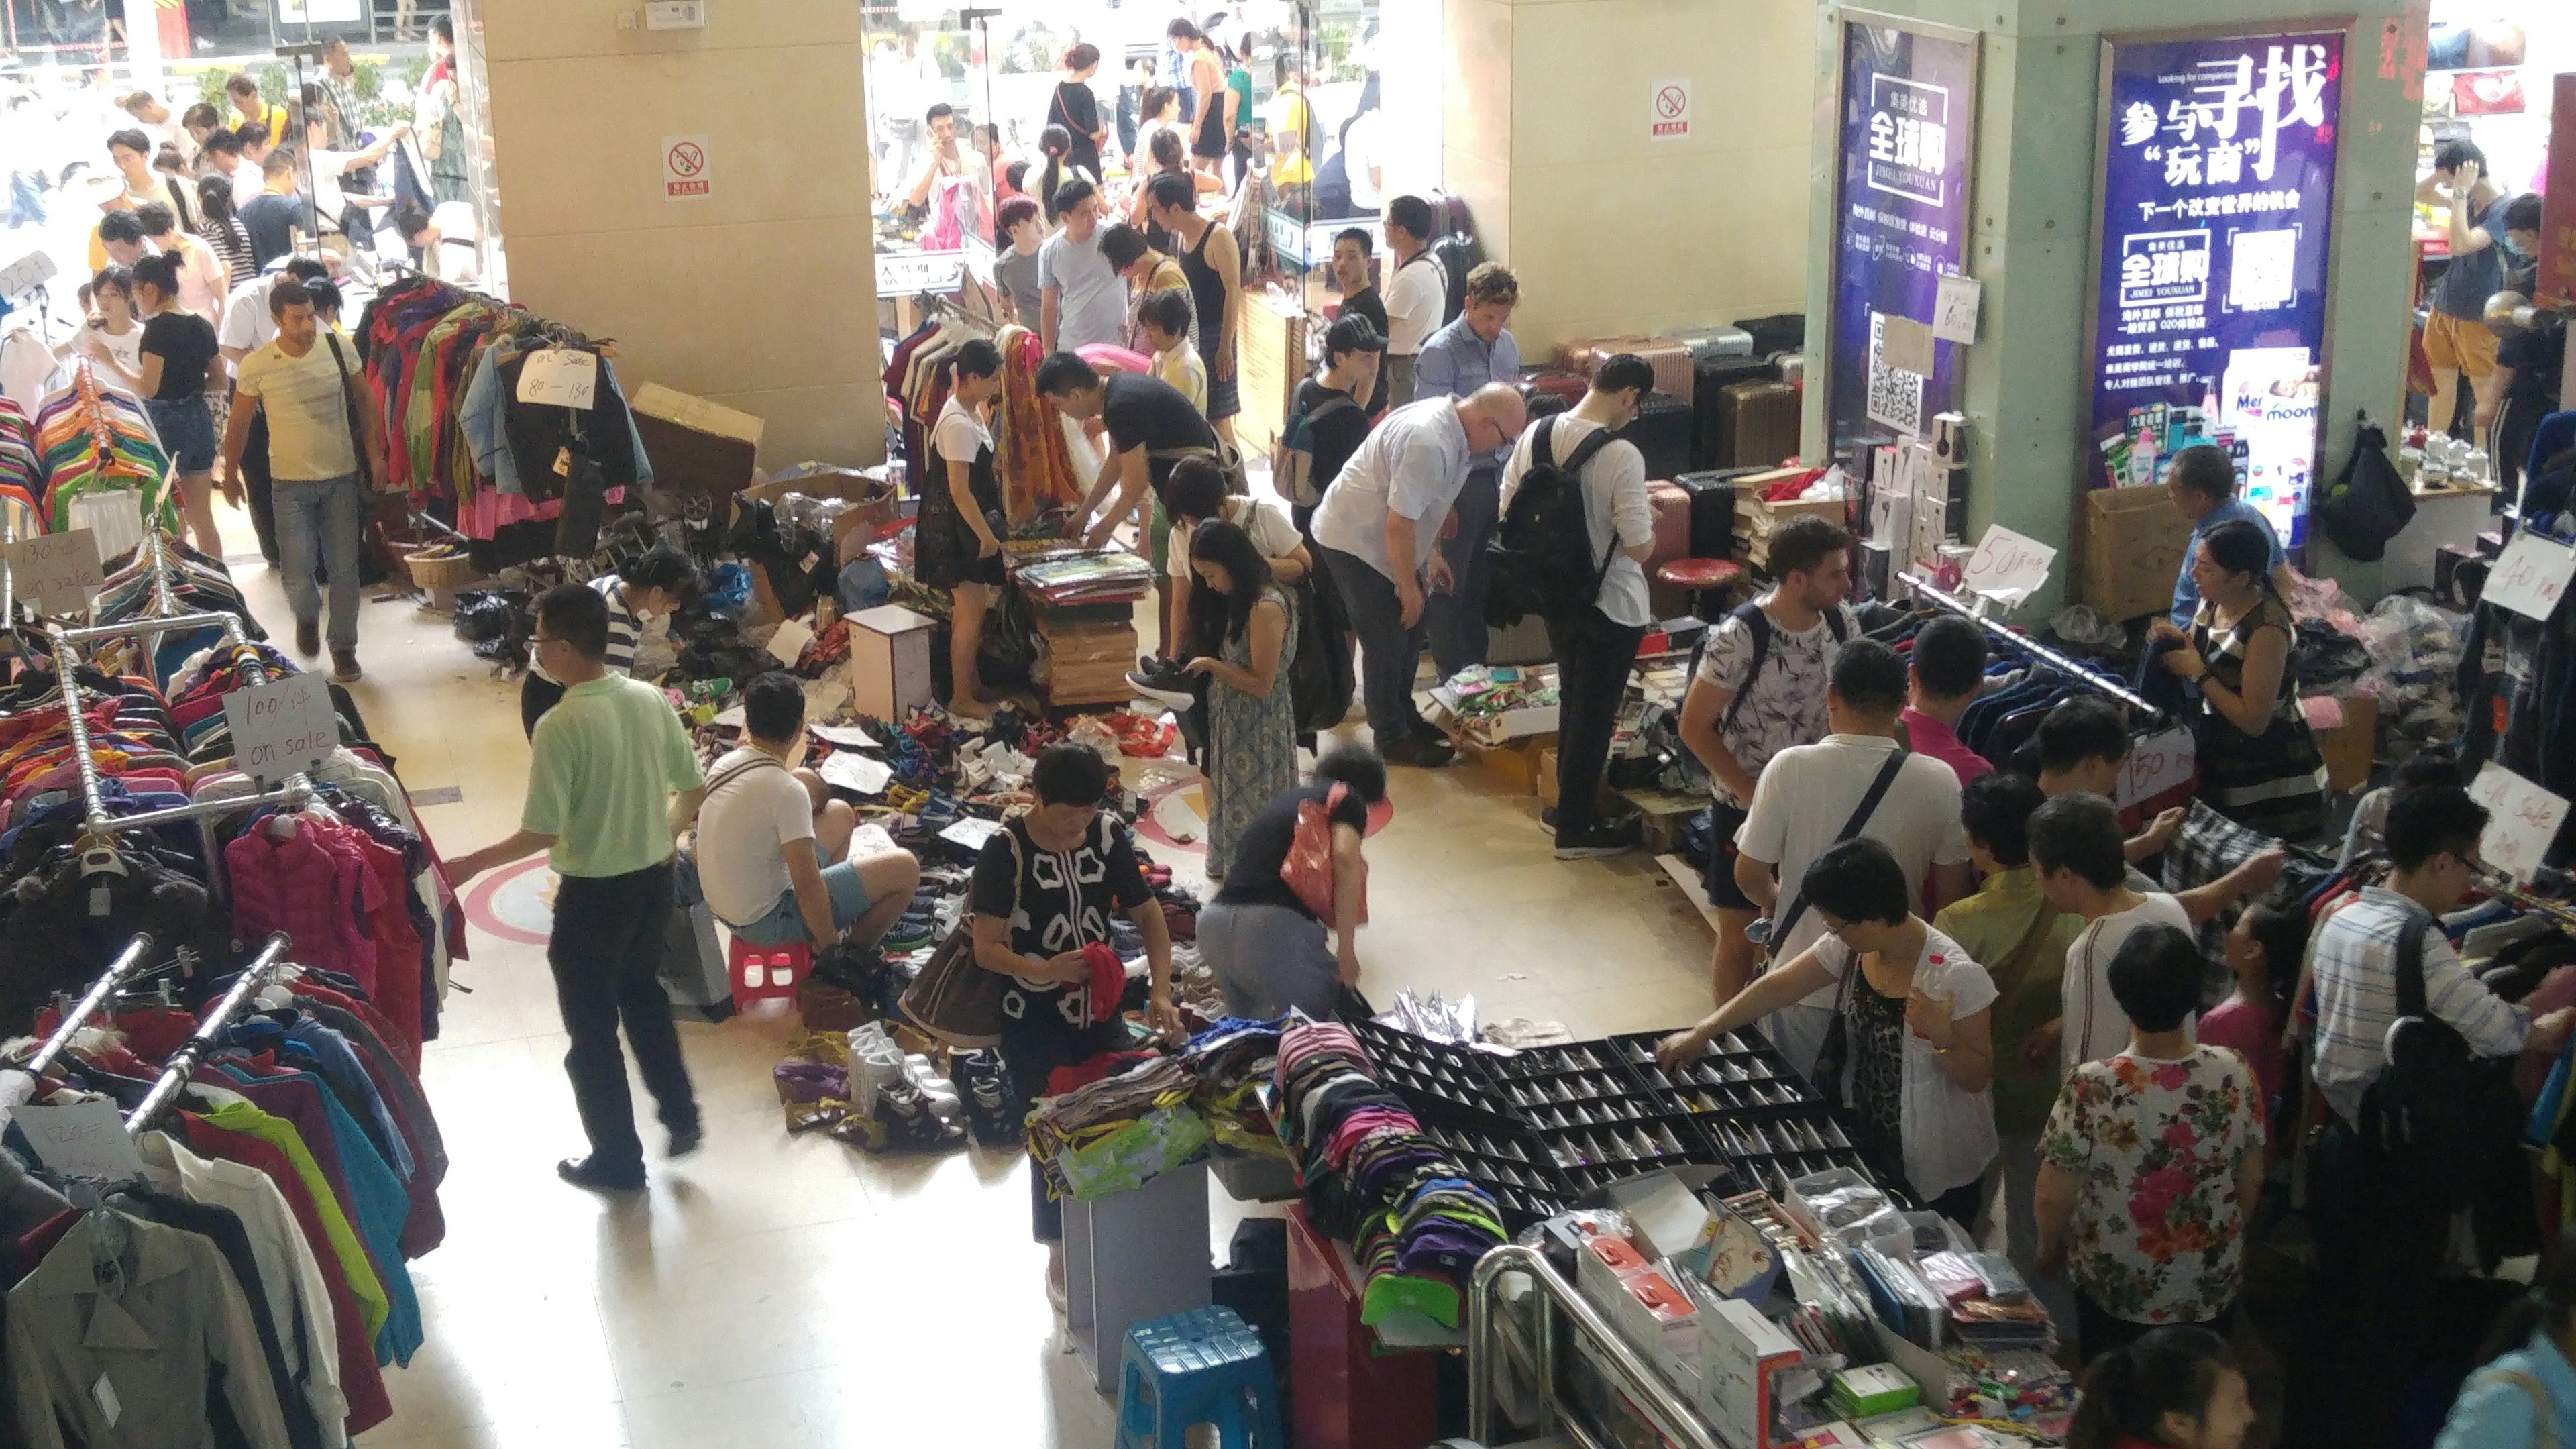 Sales of counterfeit goods at Han City following news of the shutdown. (Veronica Hernandez)